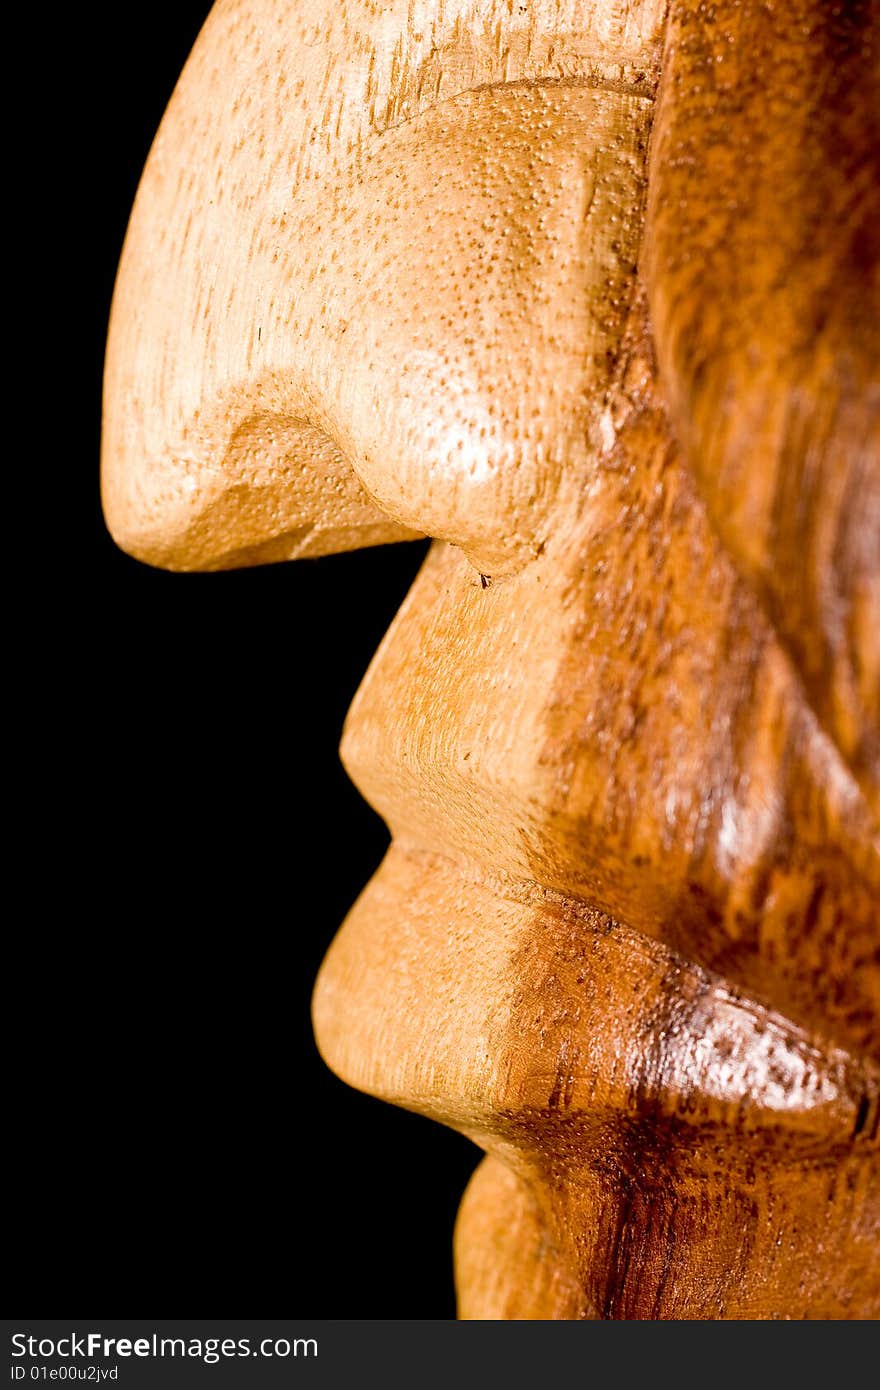 Shoot is showing a wooden statue nose and mouth that is hand carved on a black background. Shoot is showing a wooden statue nose and mouth that is hand carved on a black background